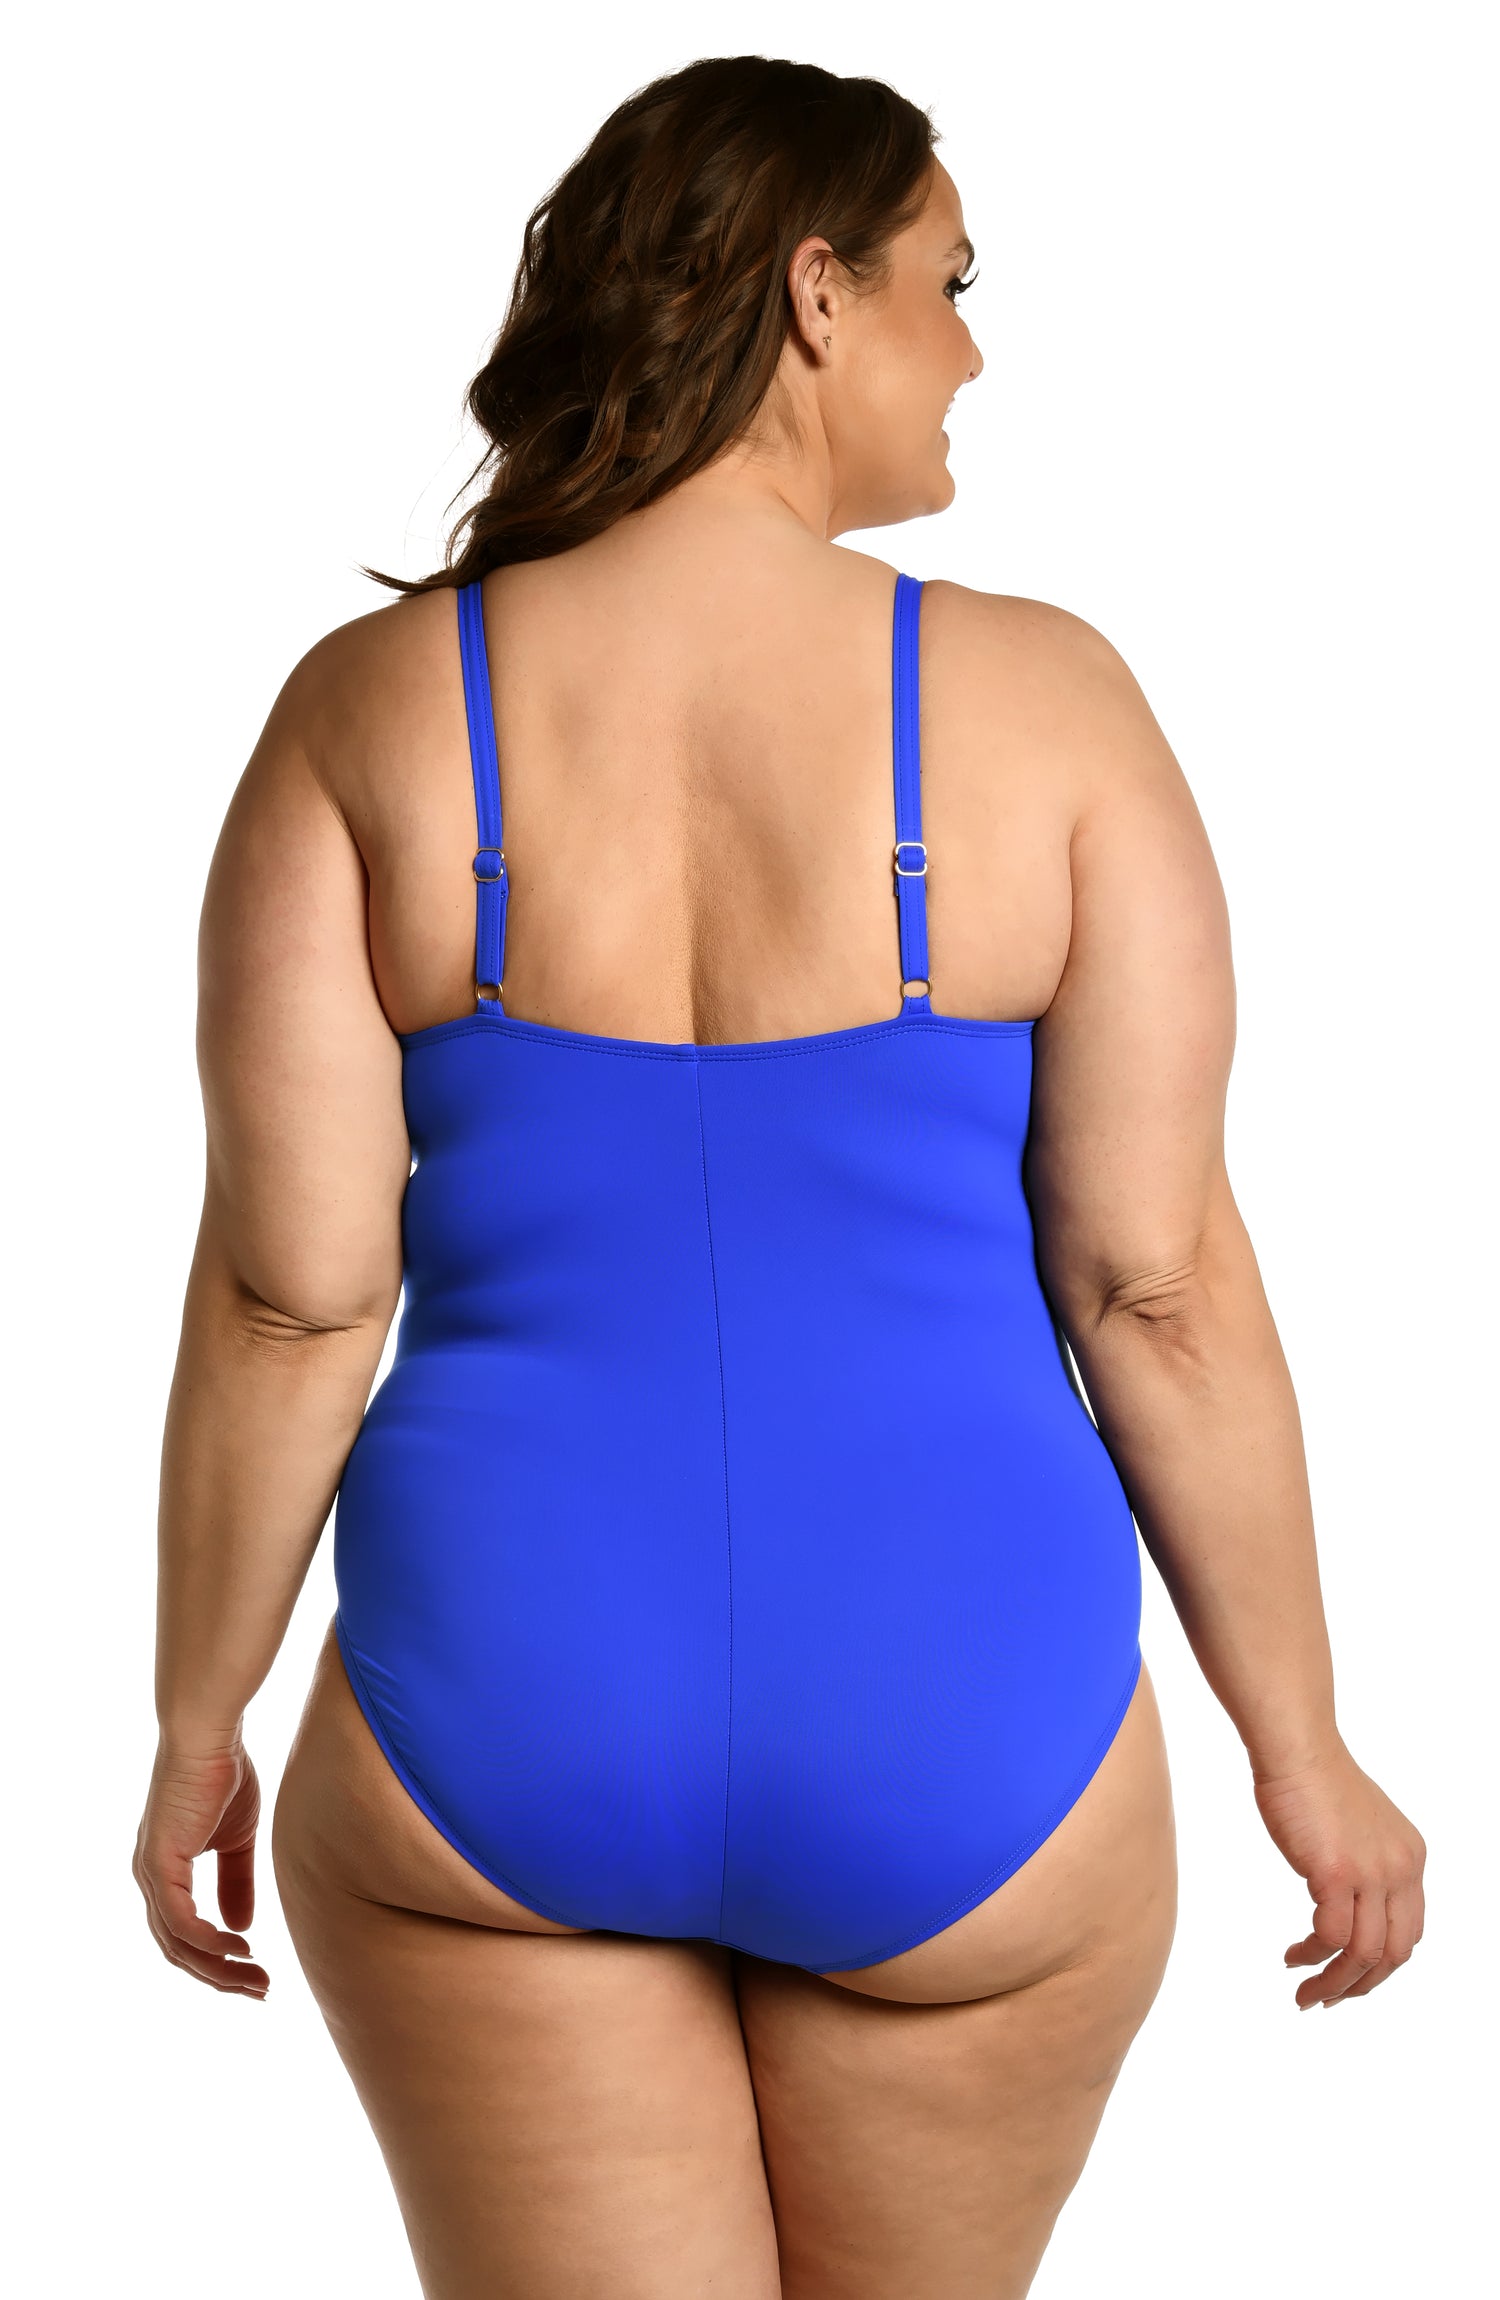 Model is wearing a sapphire colored one piece swimsuit from our Best-Selling Island Goddess collection.